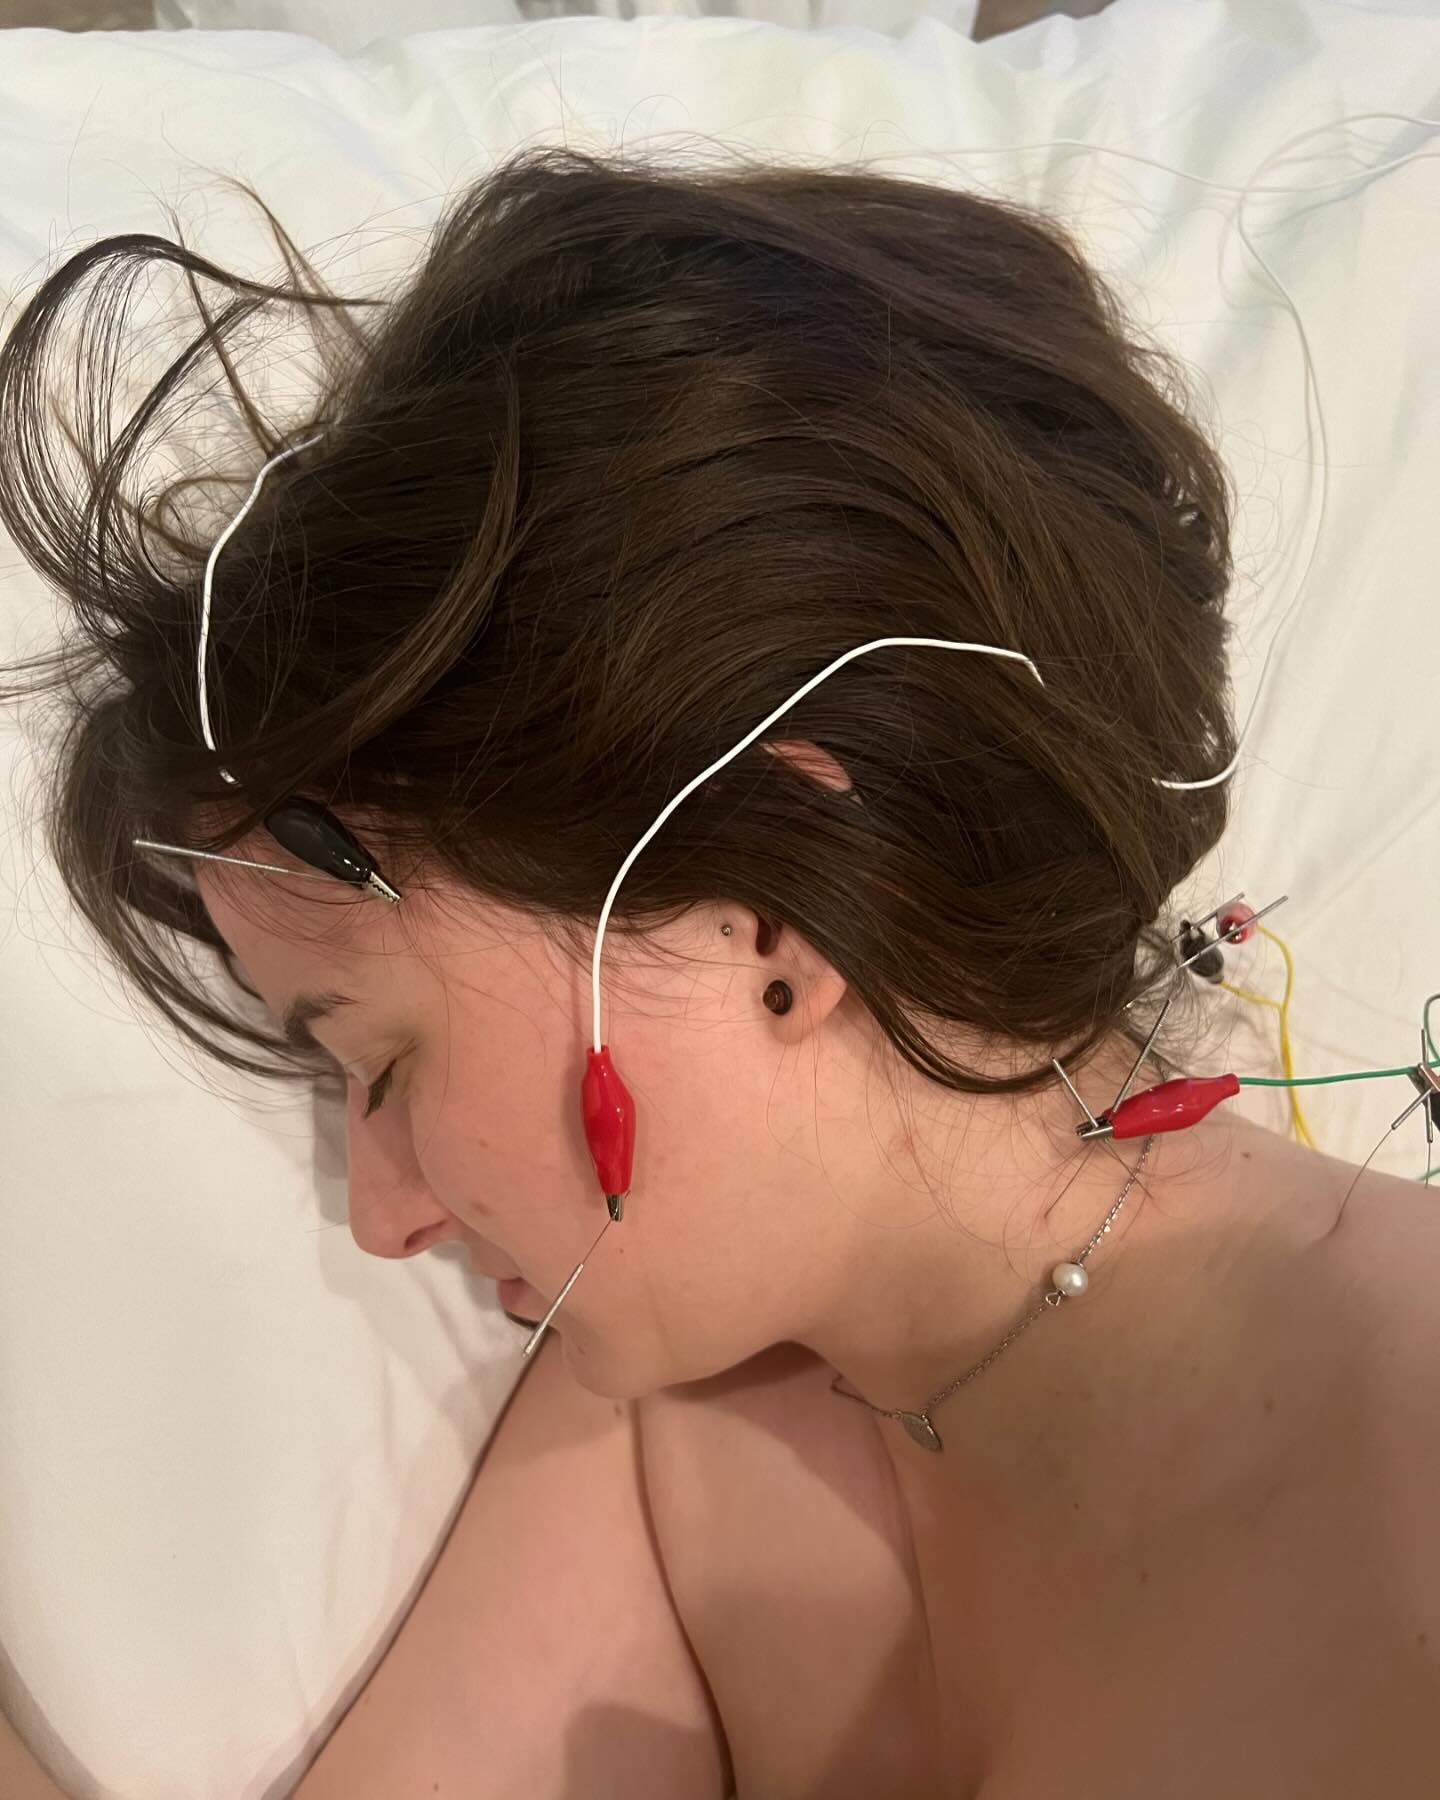 TMJ/jaw pain is well addressed with acupuncture treatment.

Did you know that in the majority of cases with TMJ/jaw pain the dysfunction stems from muscular imbalances? Unless you have a congenital abnormality in the TMJ from birth or you have suffer